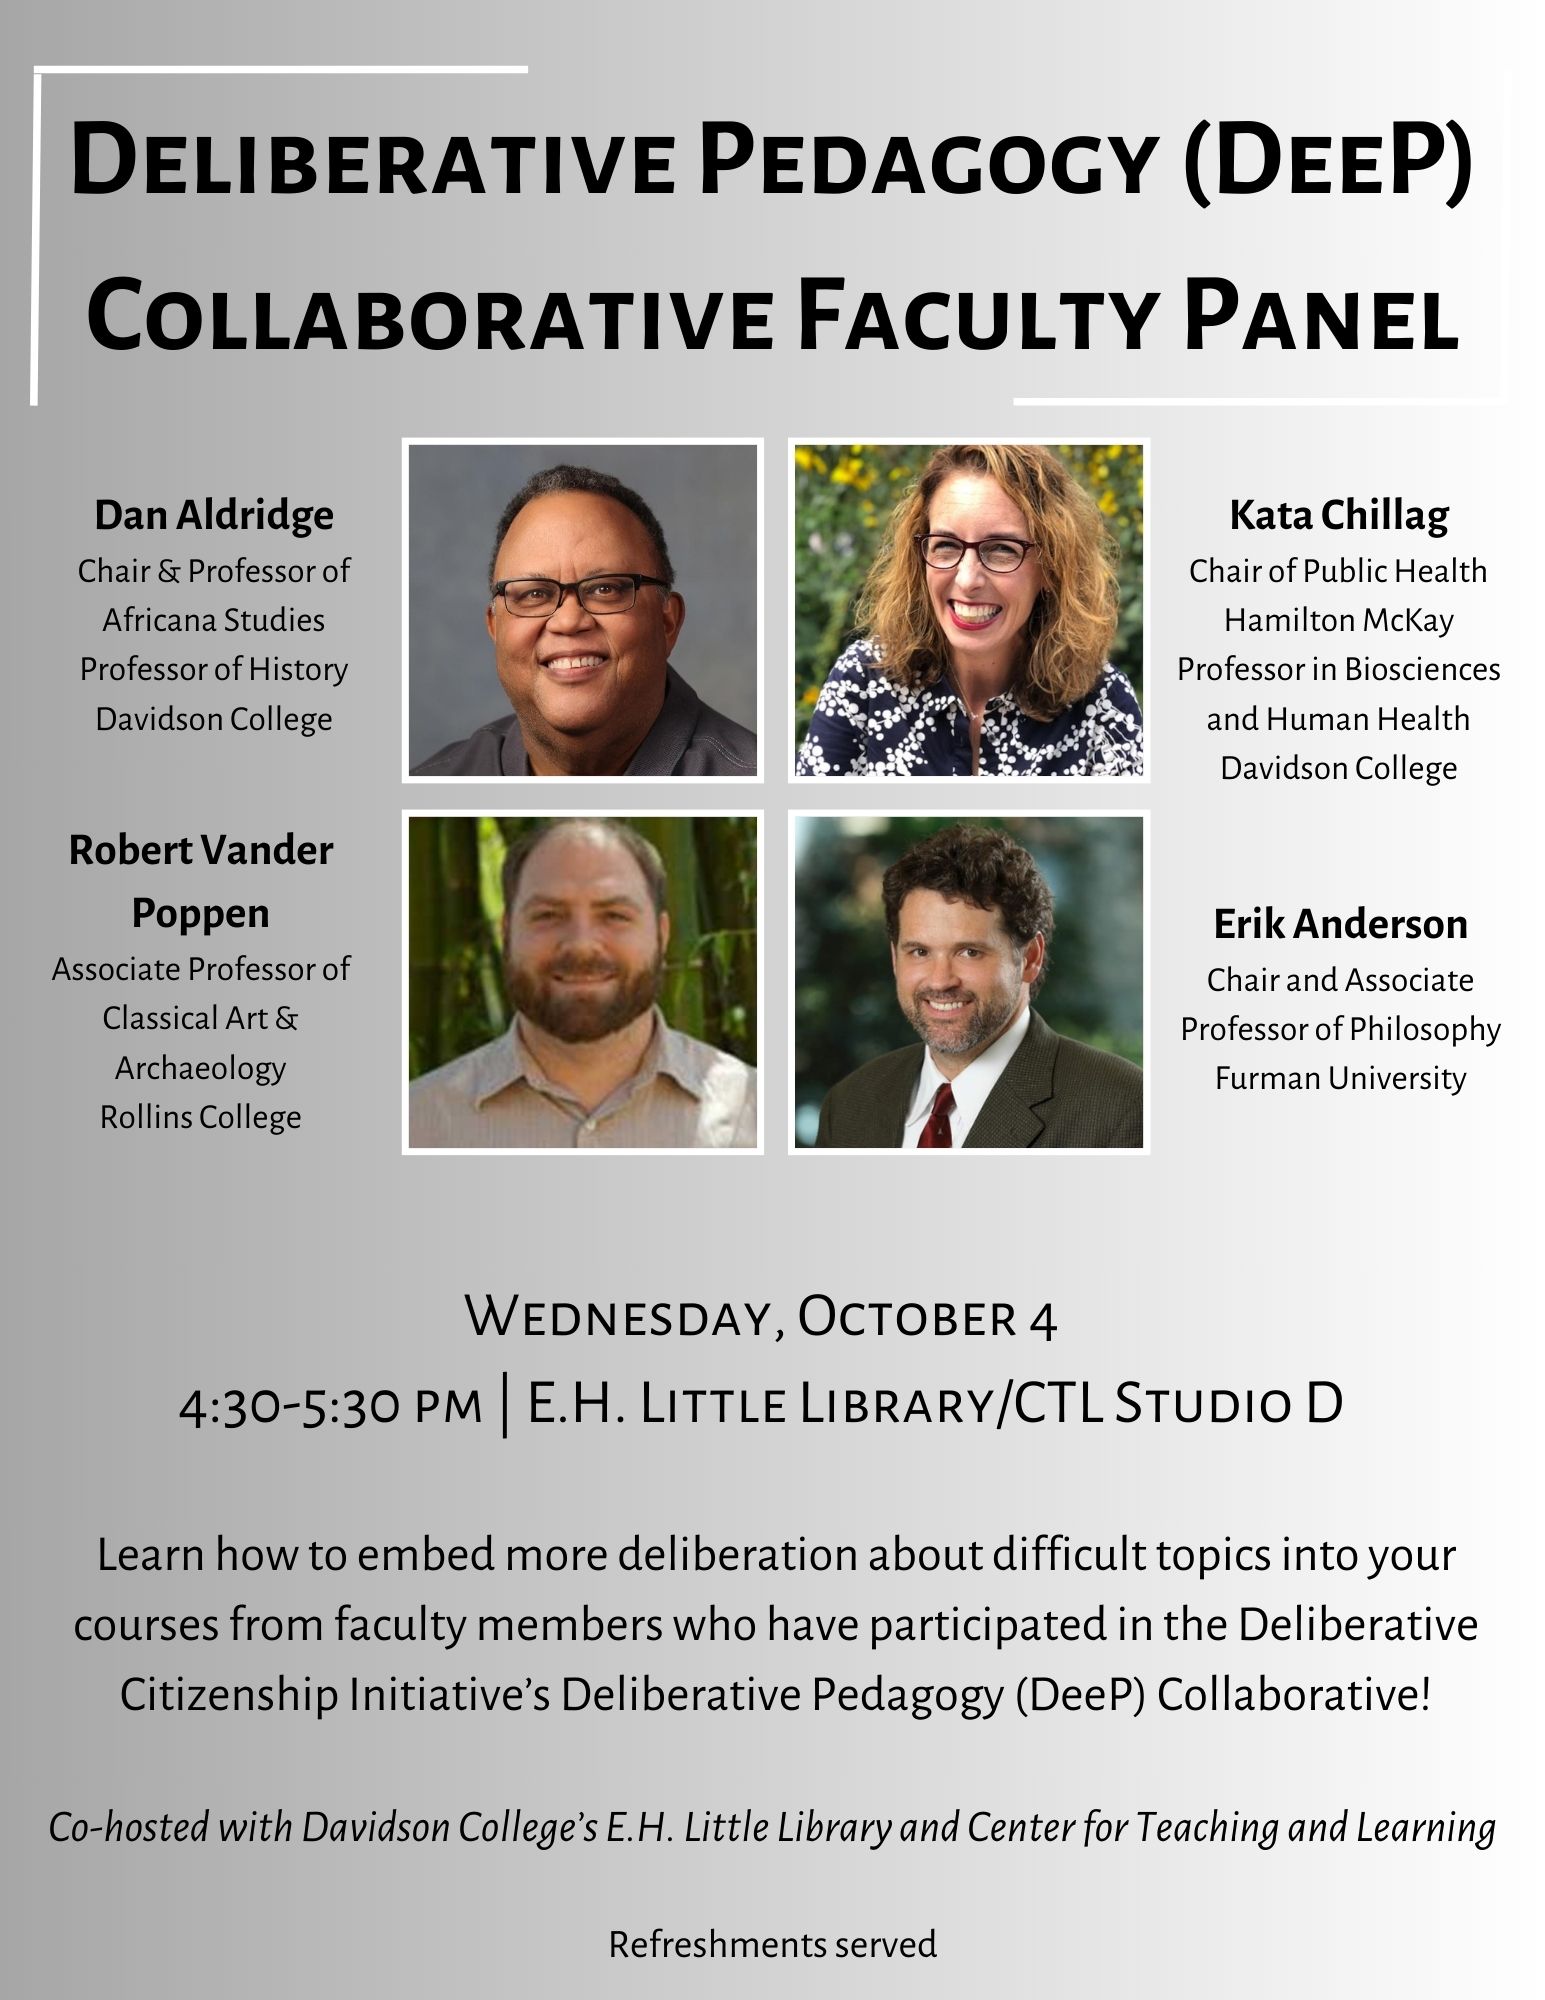 DeeP Faculty Panel Event Flyer.